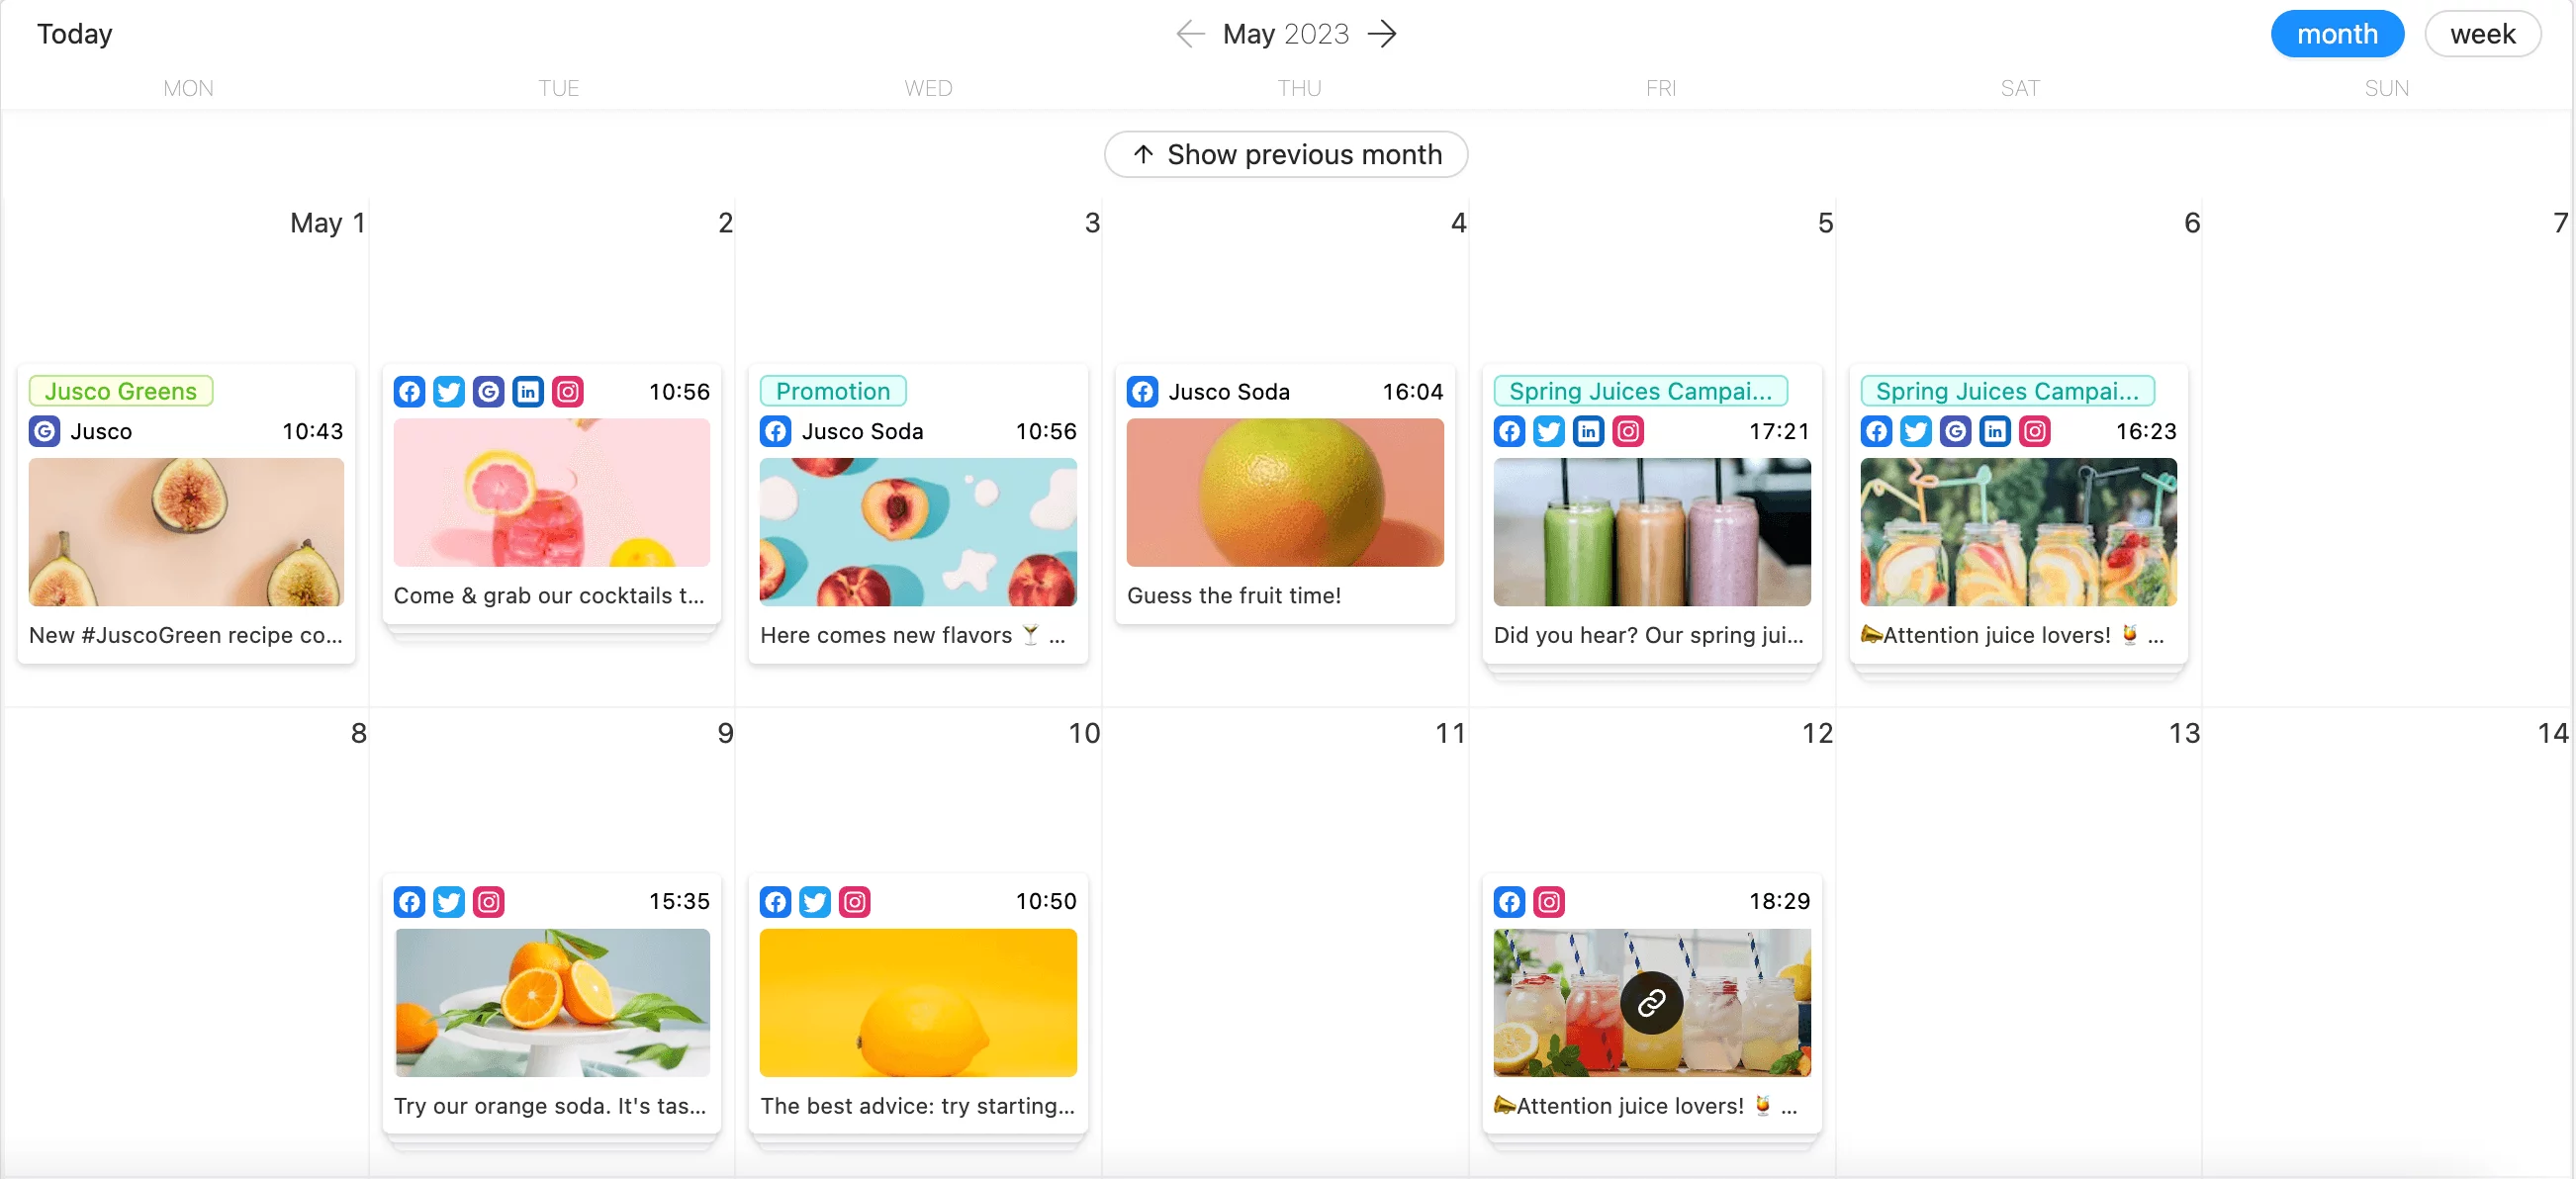 content pieces across multiple platforms displayed in one calendar